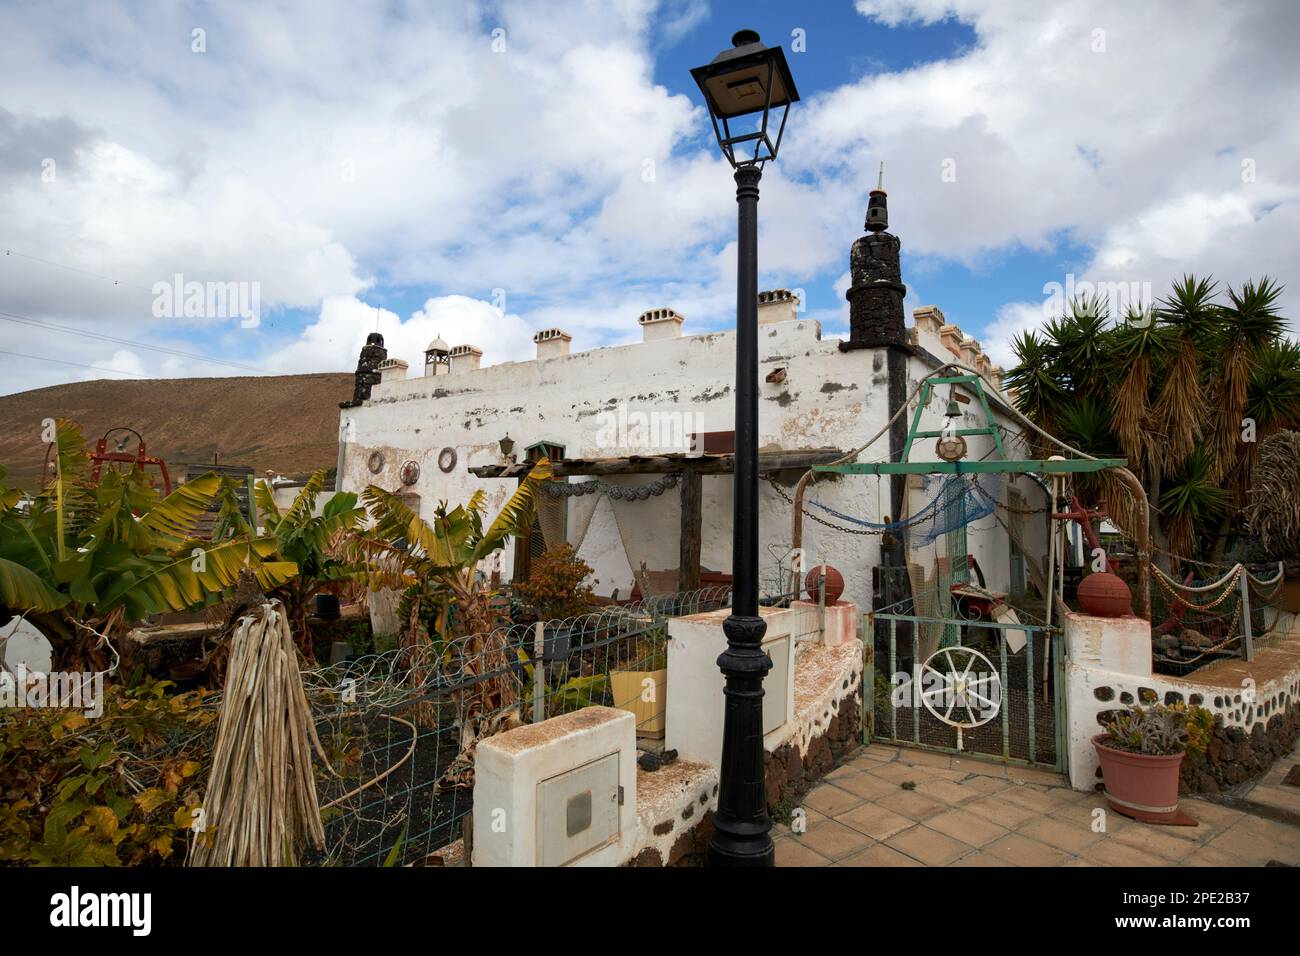 one of the more unusual casitas de femes little houses decorated in a beachcomber style with oddities and ornaments near femes Lanzarote, Canary Islan Stock Photo